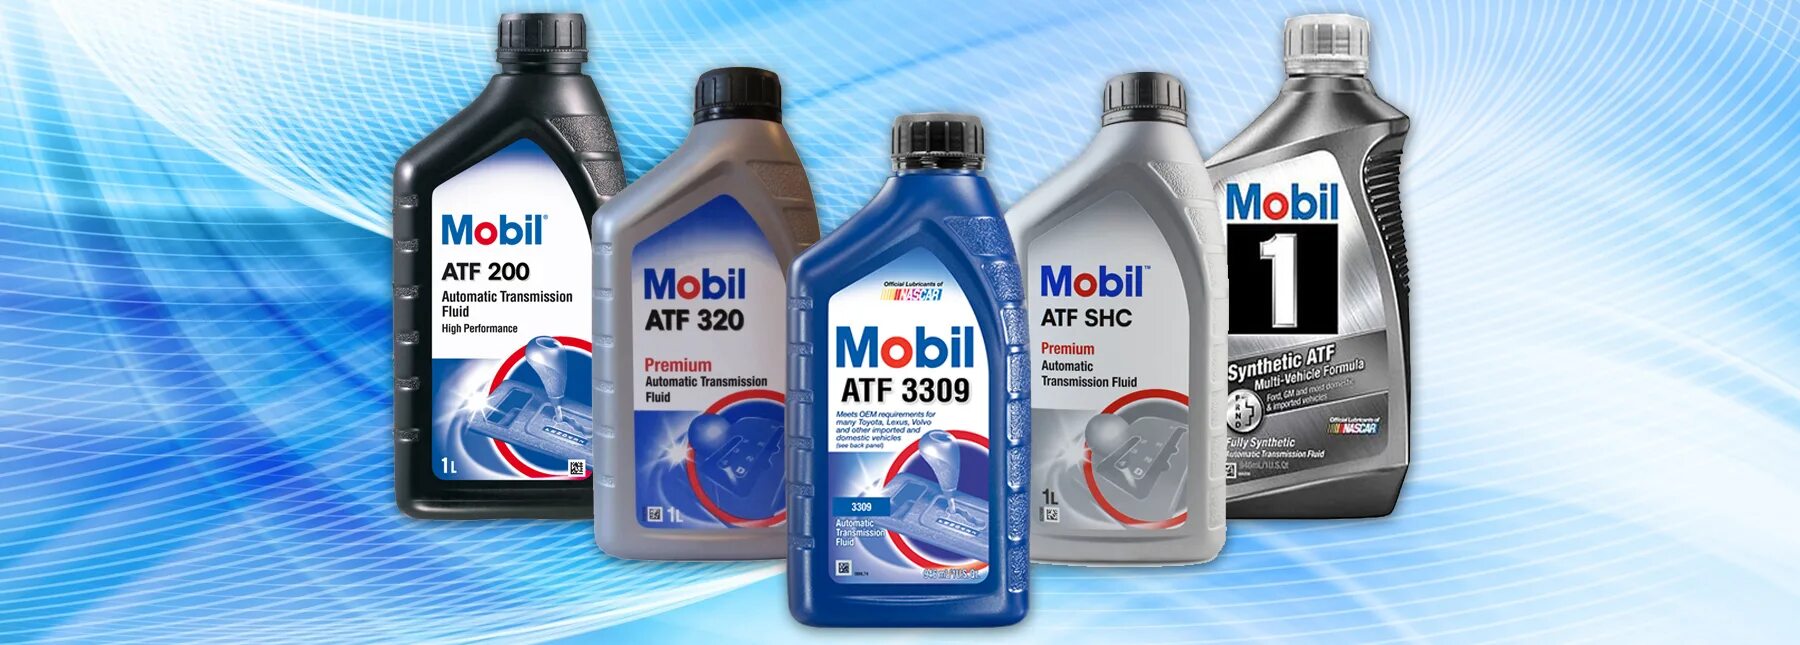 Mobil ATF 200 Automatic transmission Fluid. Mobil ATF SHC. Mobil ATF SHC (1л). Mobil ATF 824080.